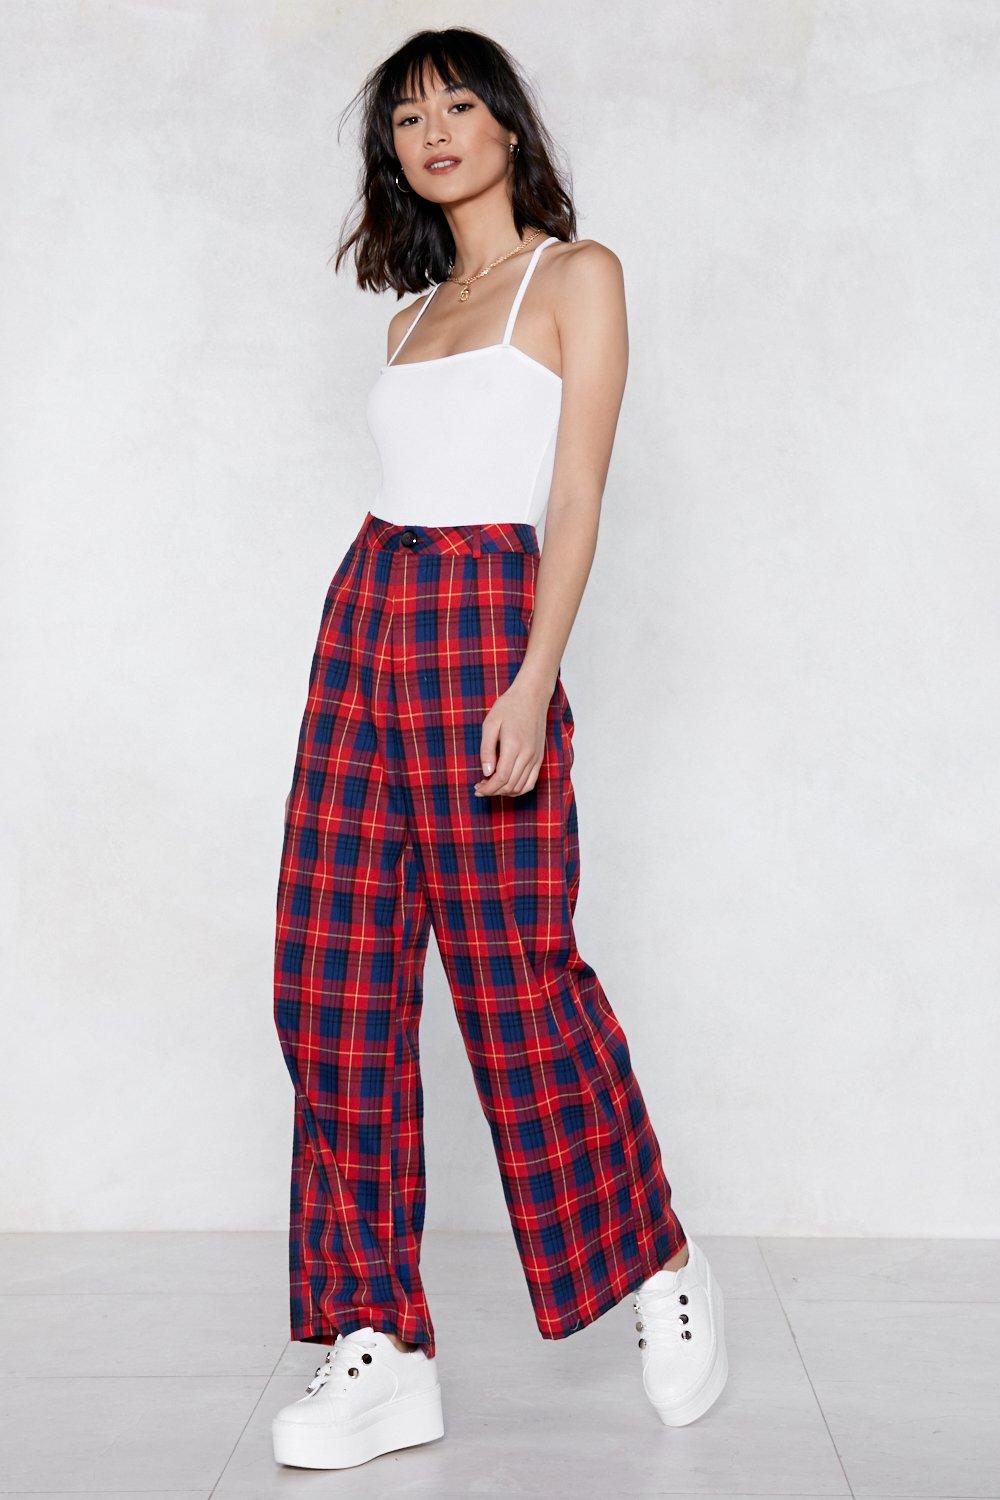 black and red check pants